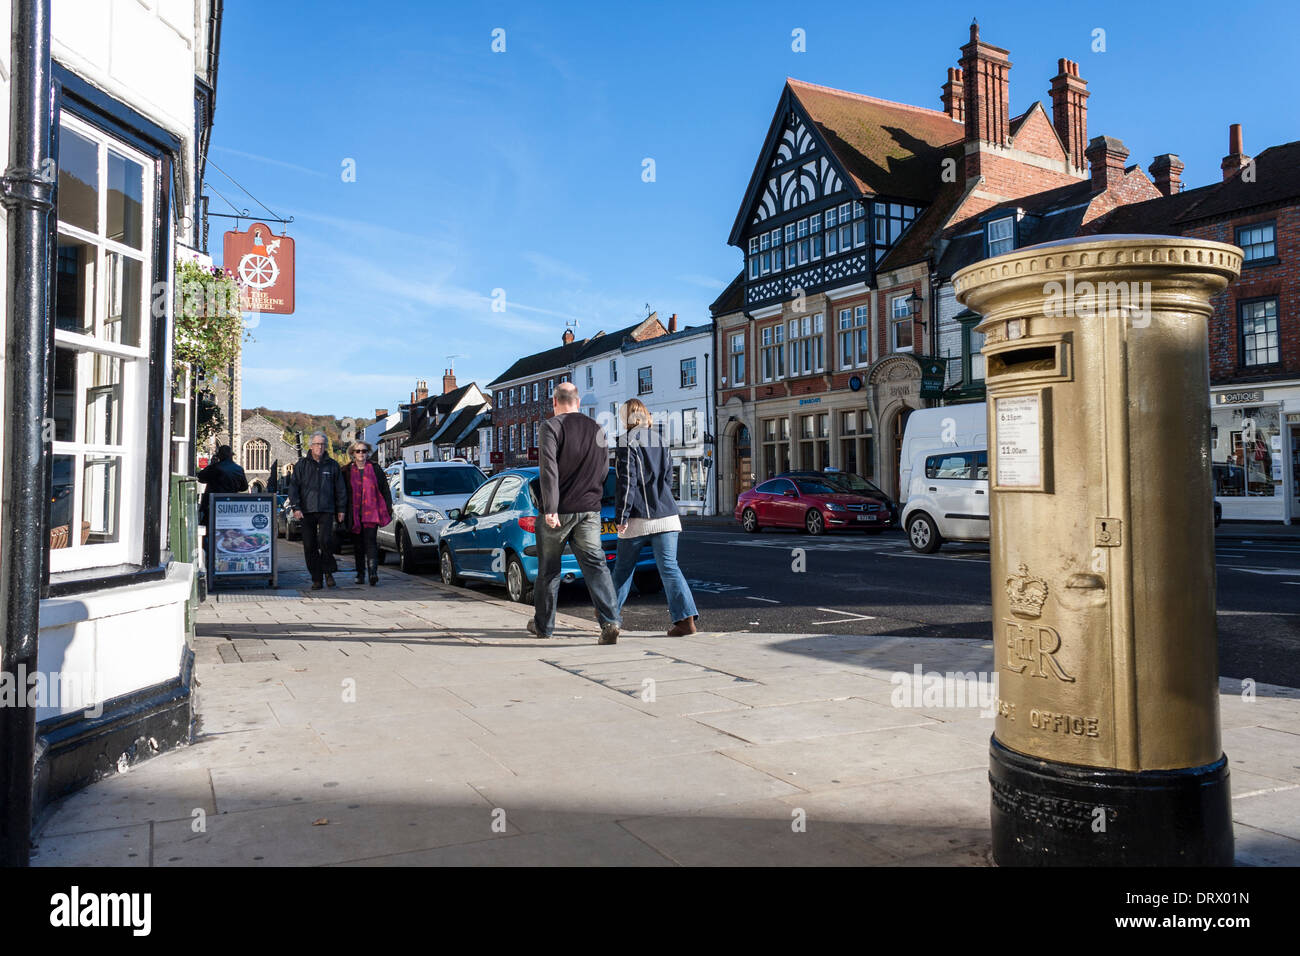 Gold painted pillar box marking the success of Team GB rowing, Henley-on-Thames, Oxfordshire, England, GB, UK. Stock Photo